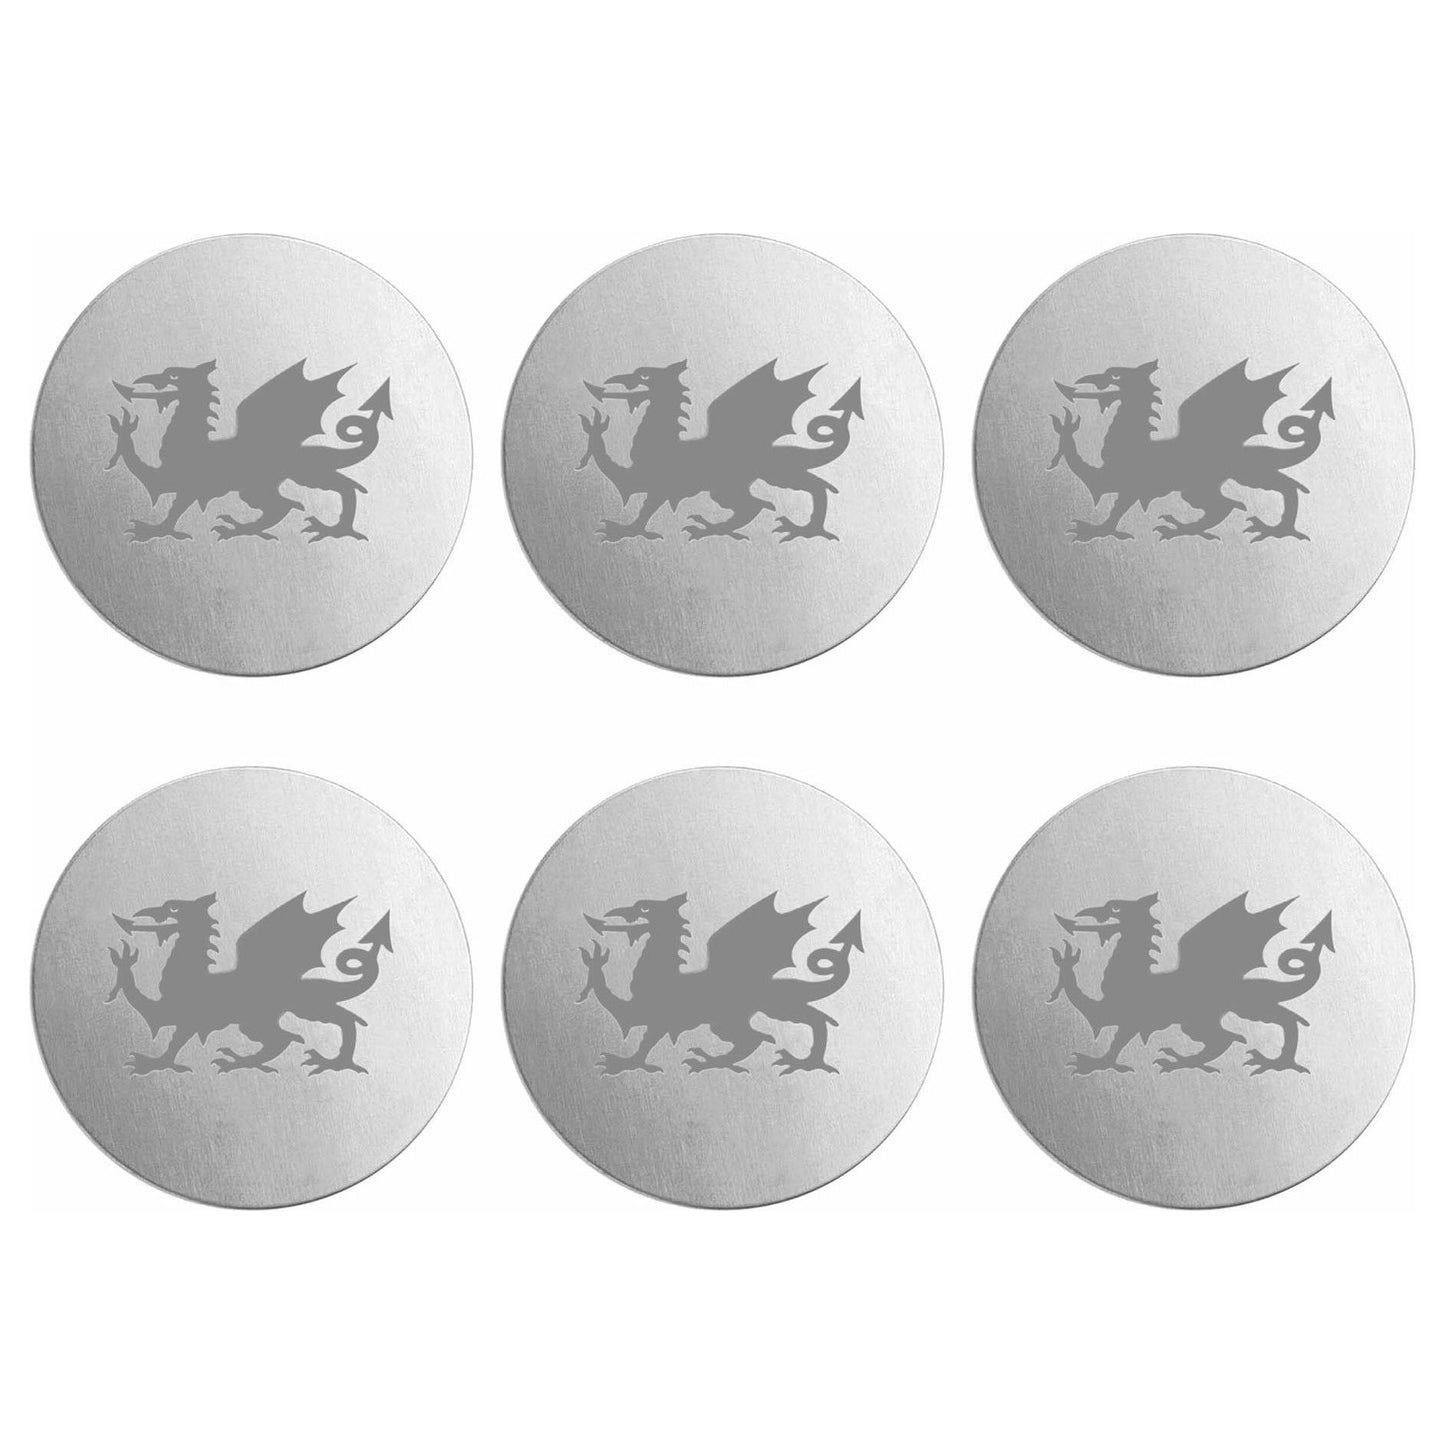 Wales Welsh Dragon Golf Ball Marker (Pack of 6) - Ashton and Finch